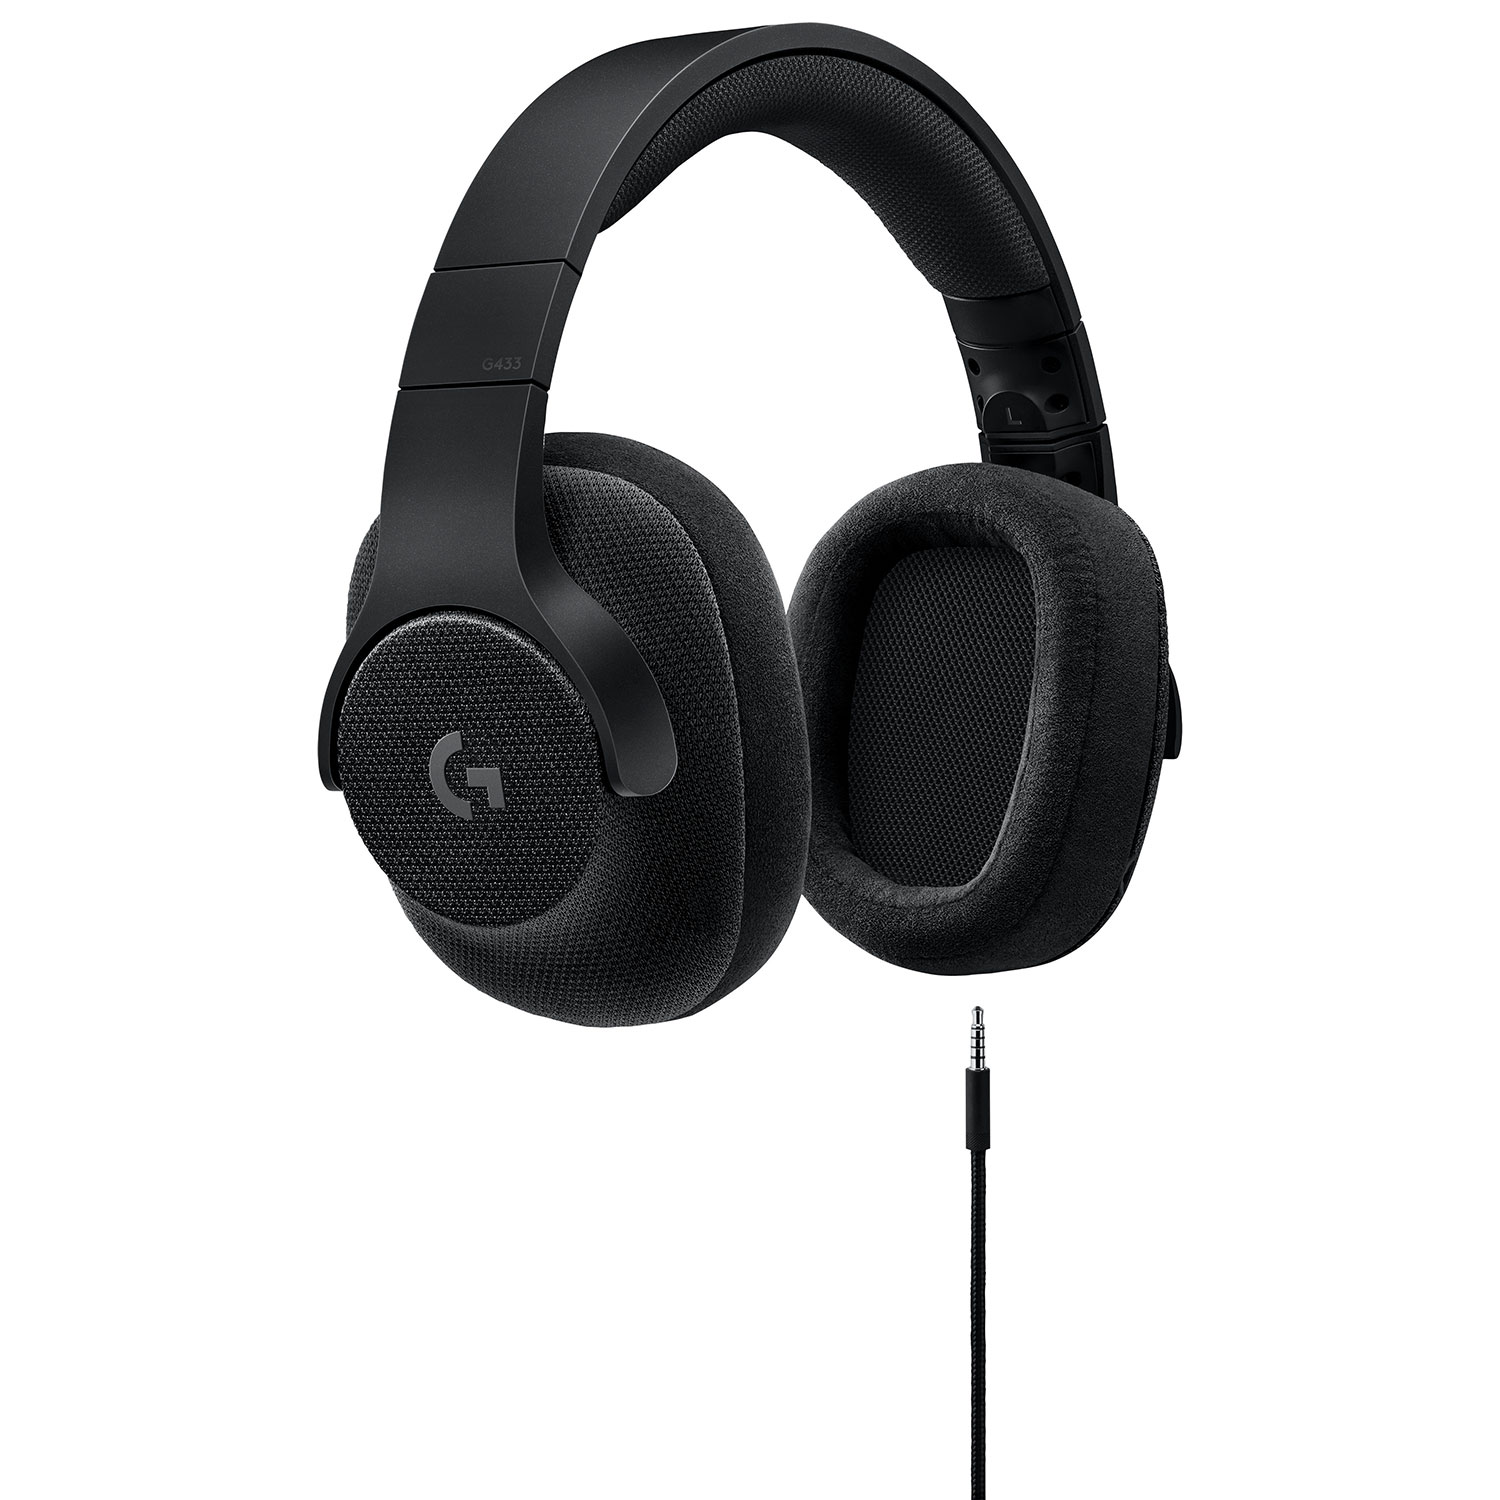 Logitech G433 Wired Gaming Headset with Microphone - Black